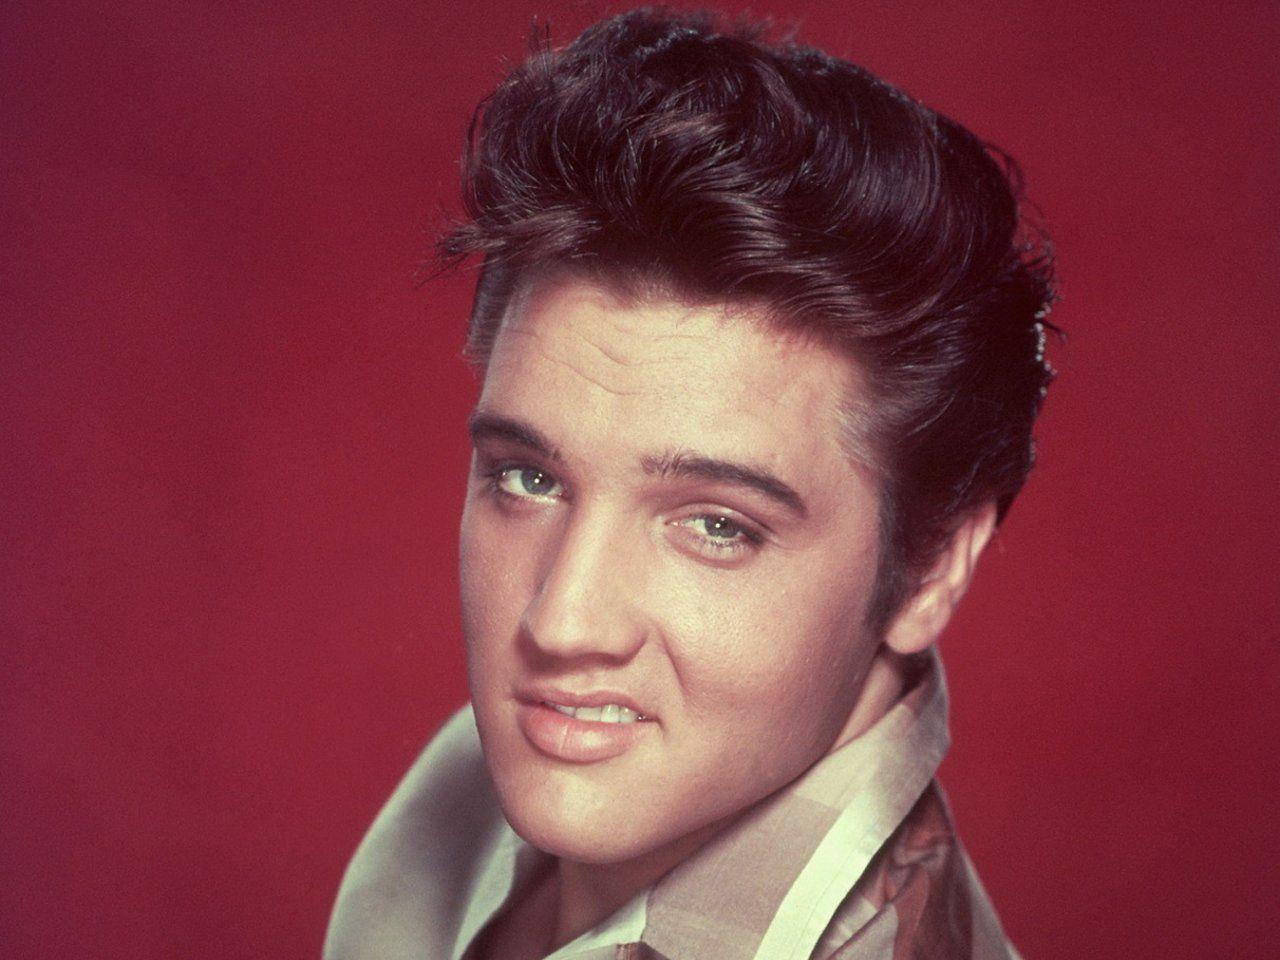 The number one place to buy and sell Elvis Presley memorabilia is